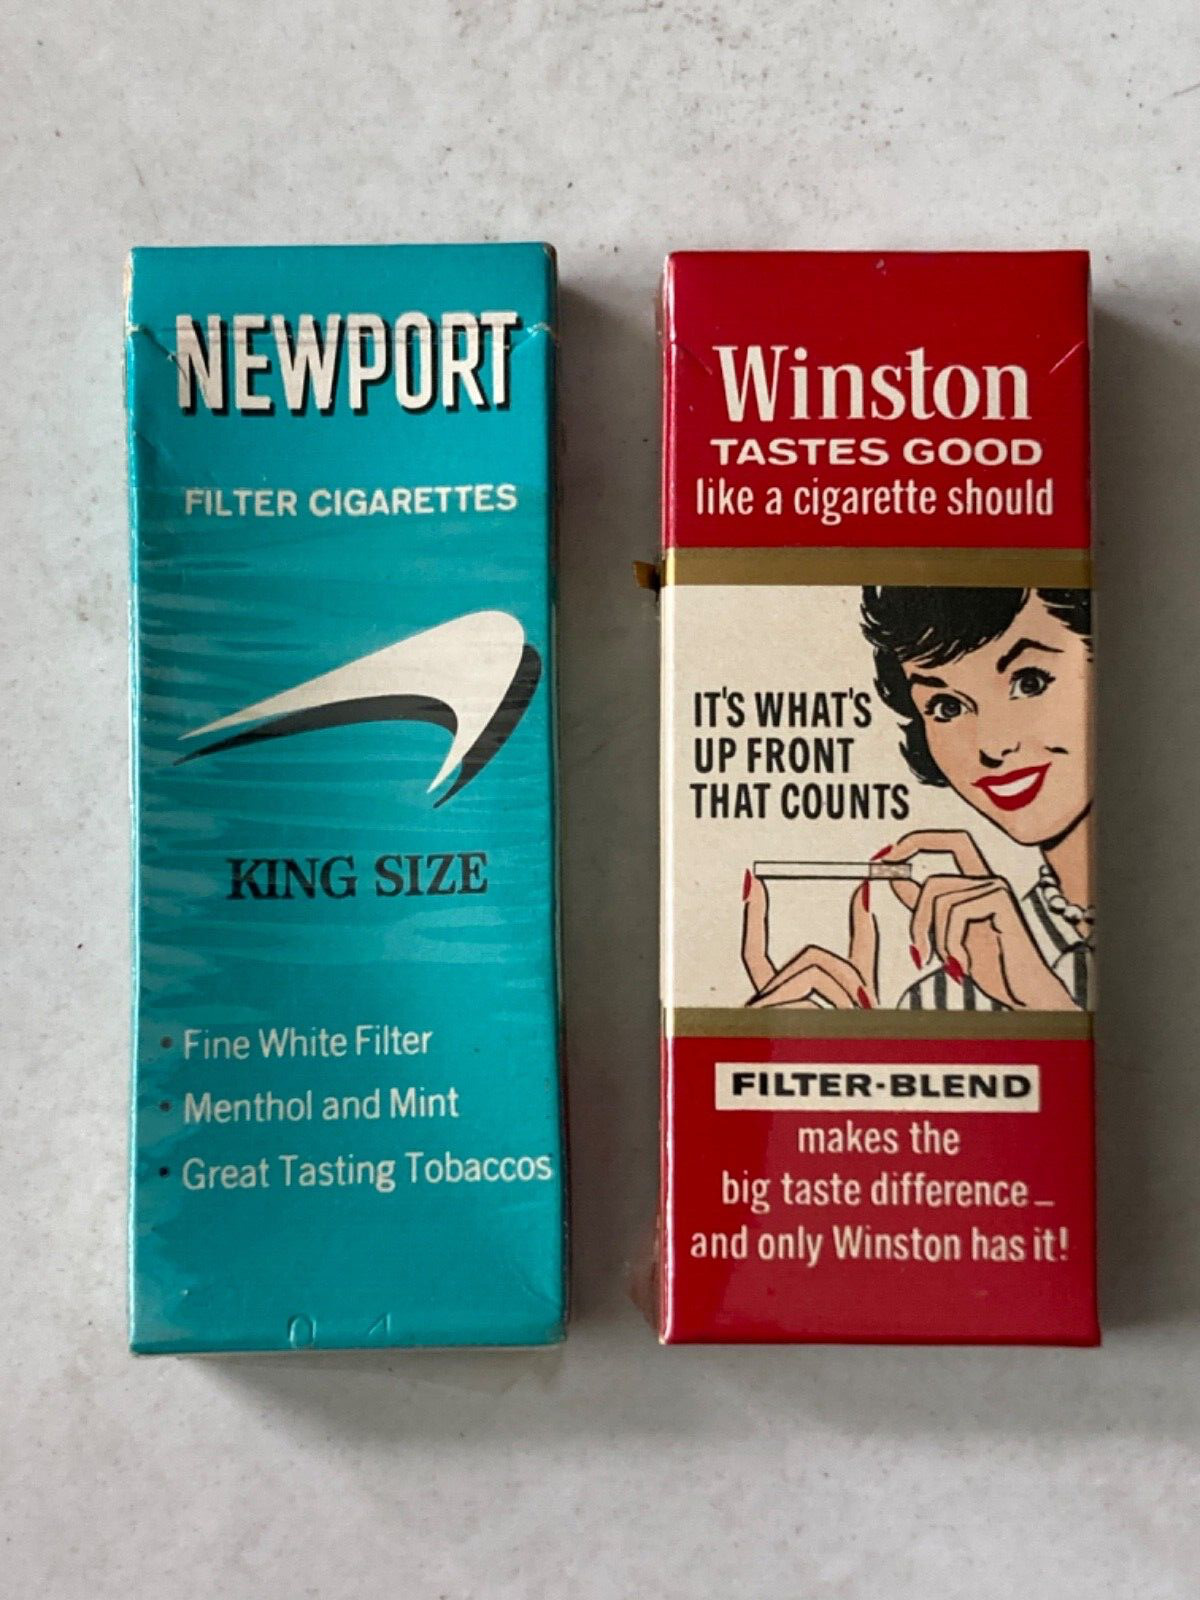 Vintage Airline Meal Complimentary Cigarettes 2 Packs Newport & Winston